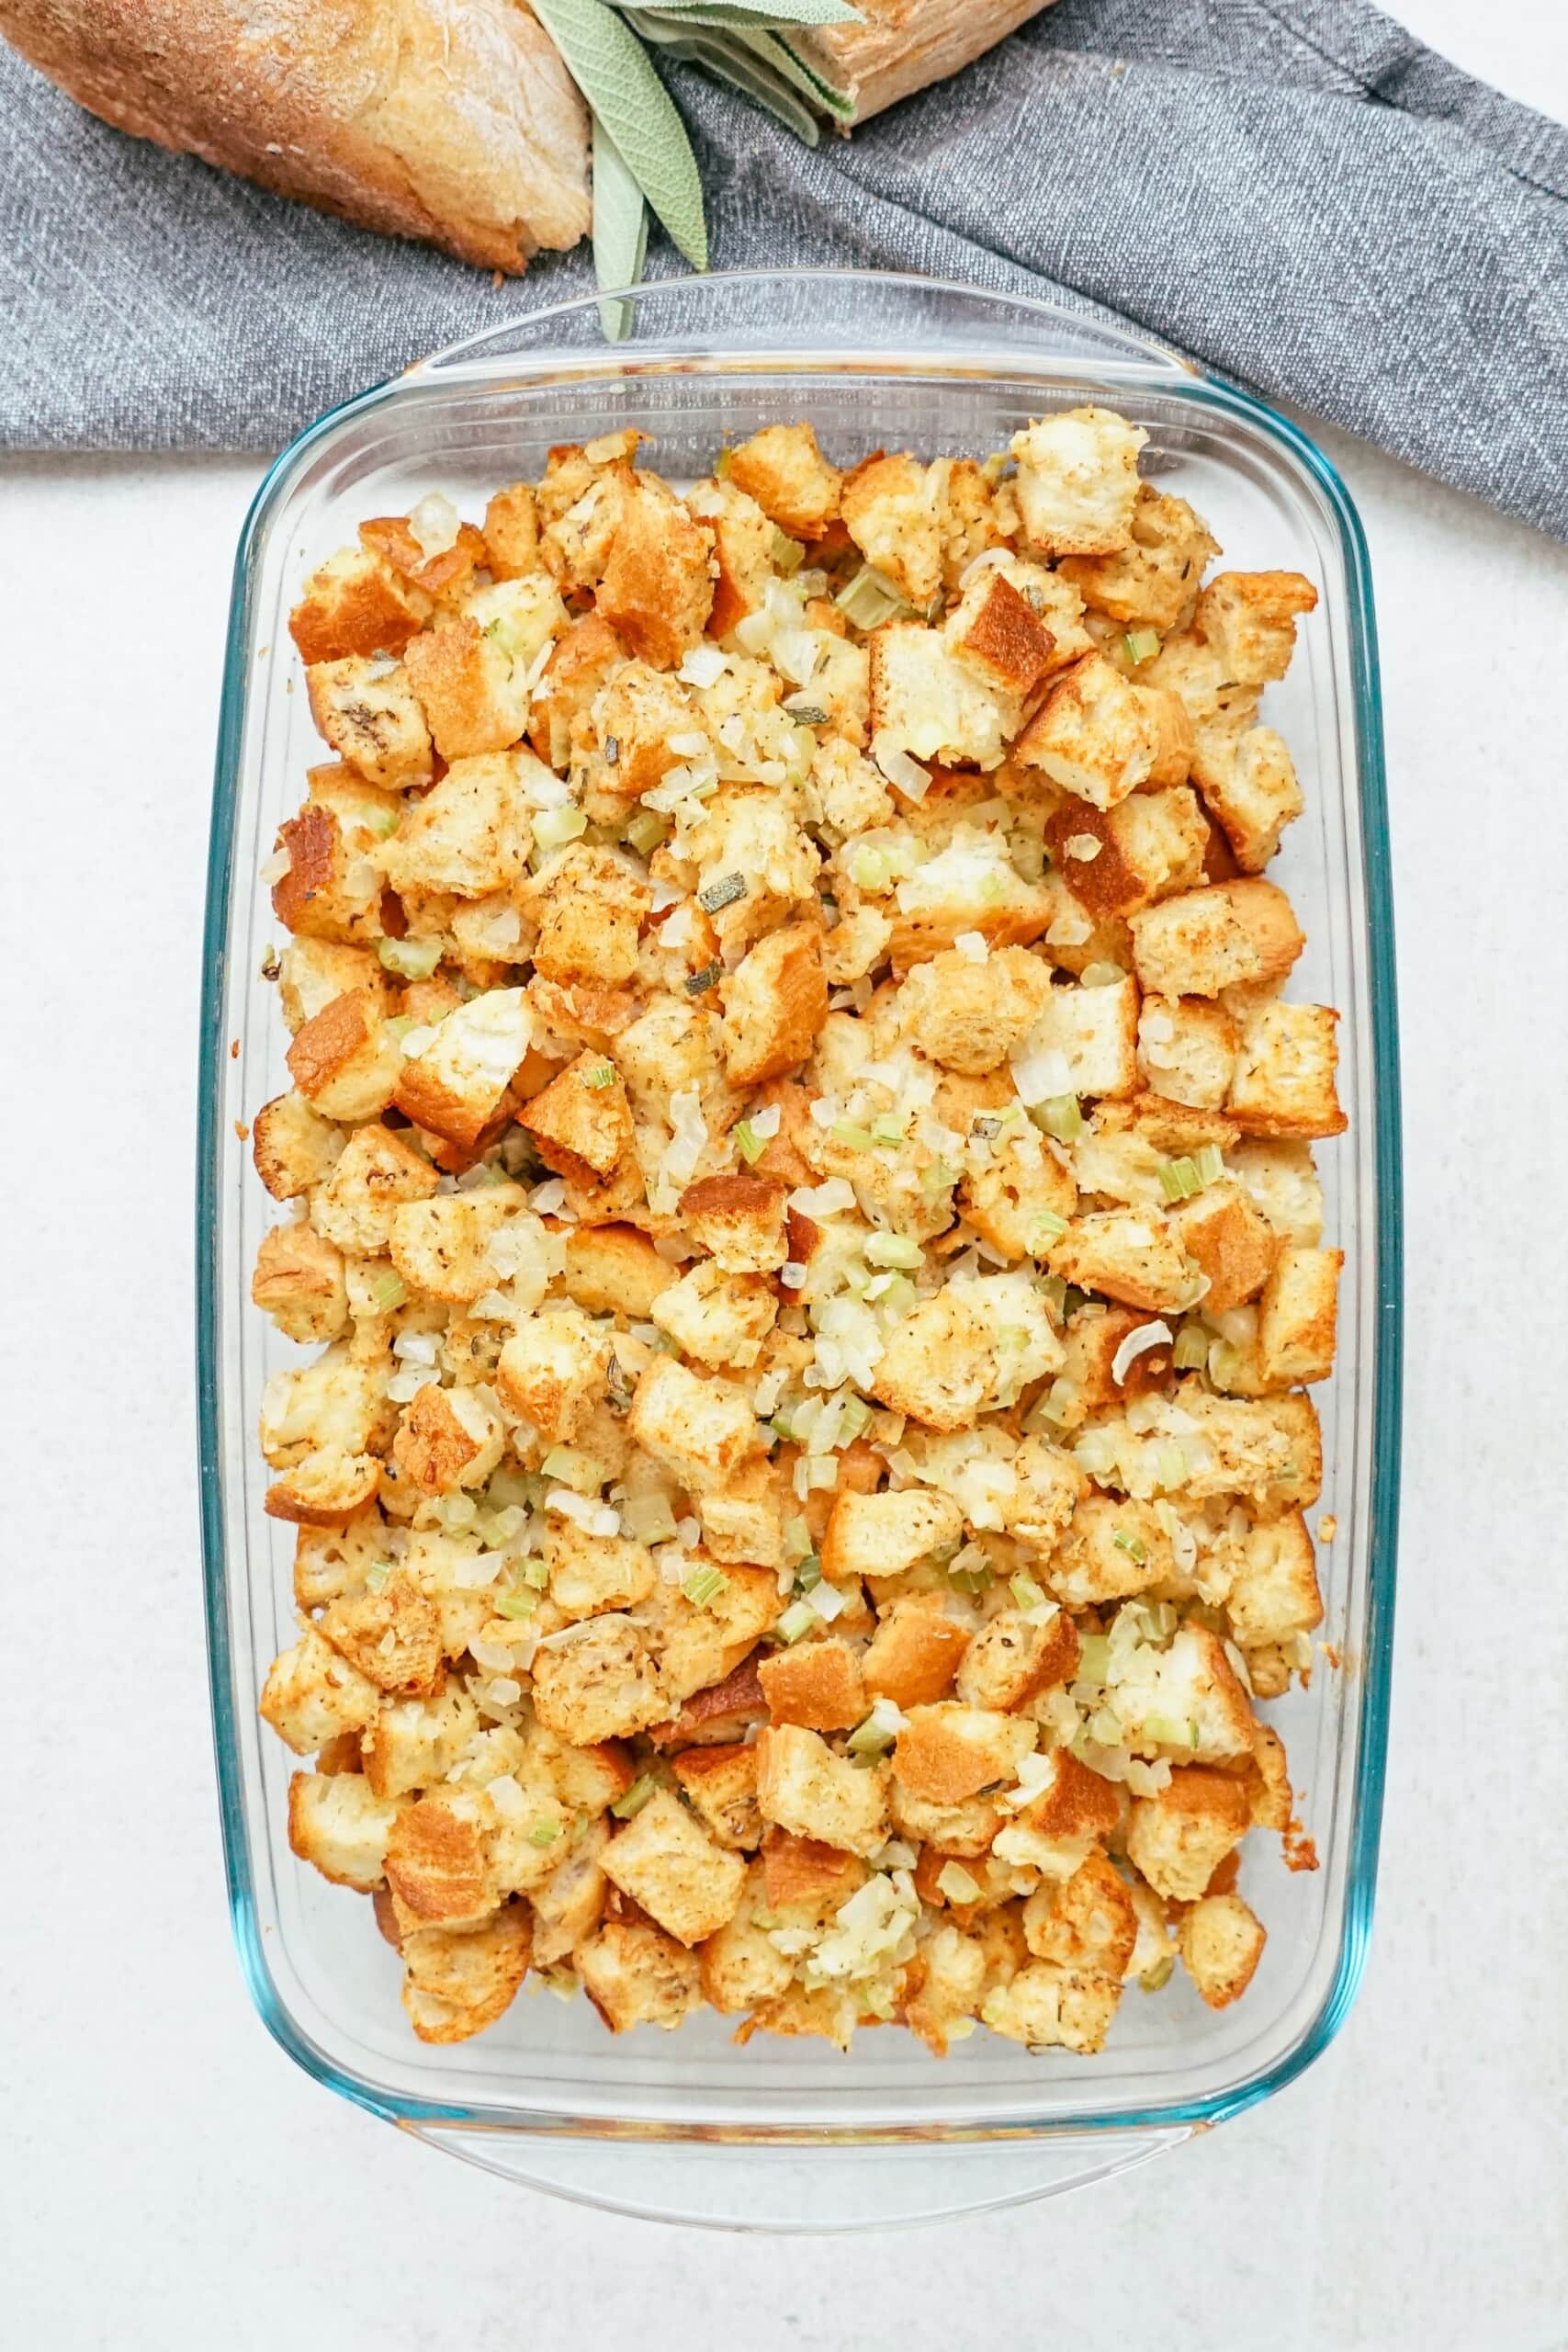 baked stuffing in a casserole dish